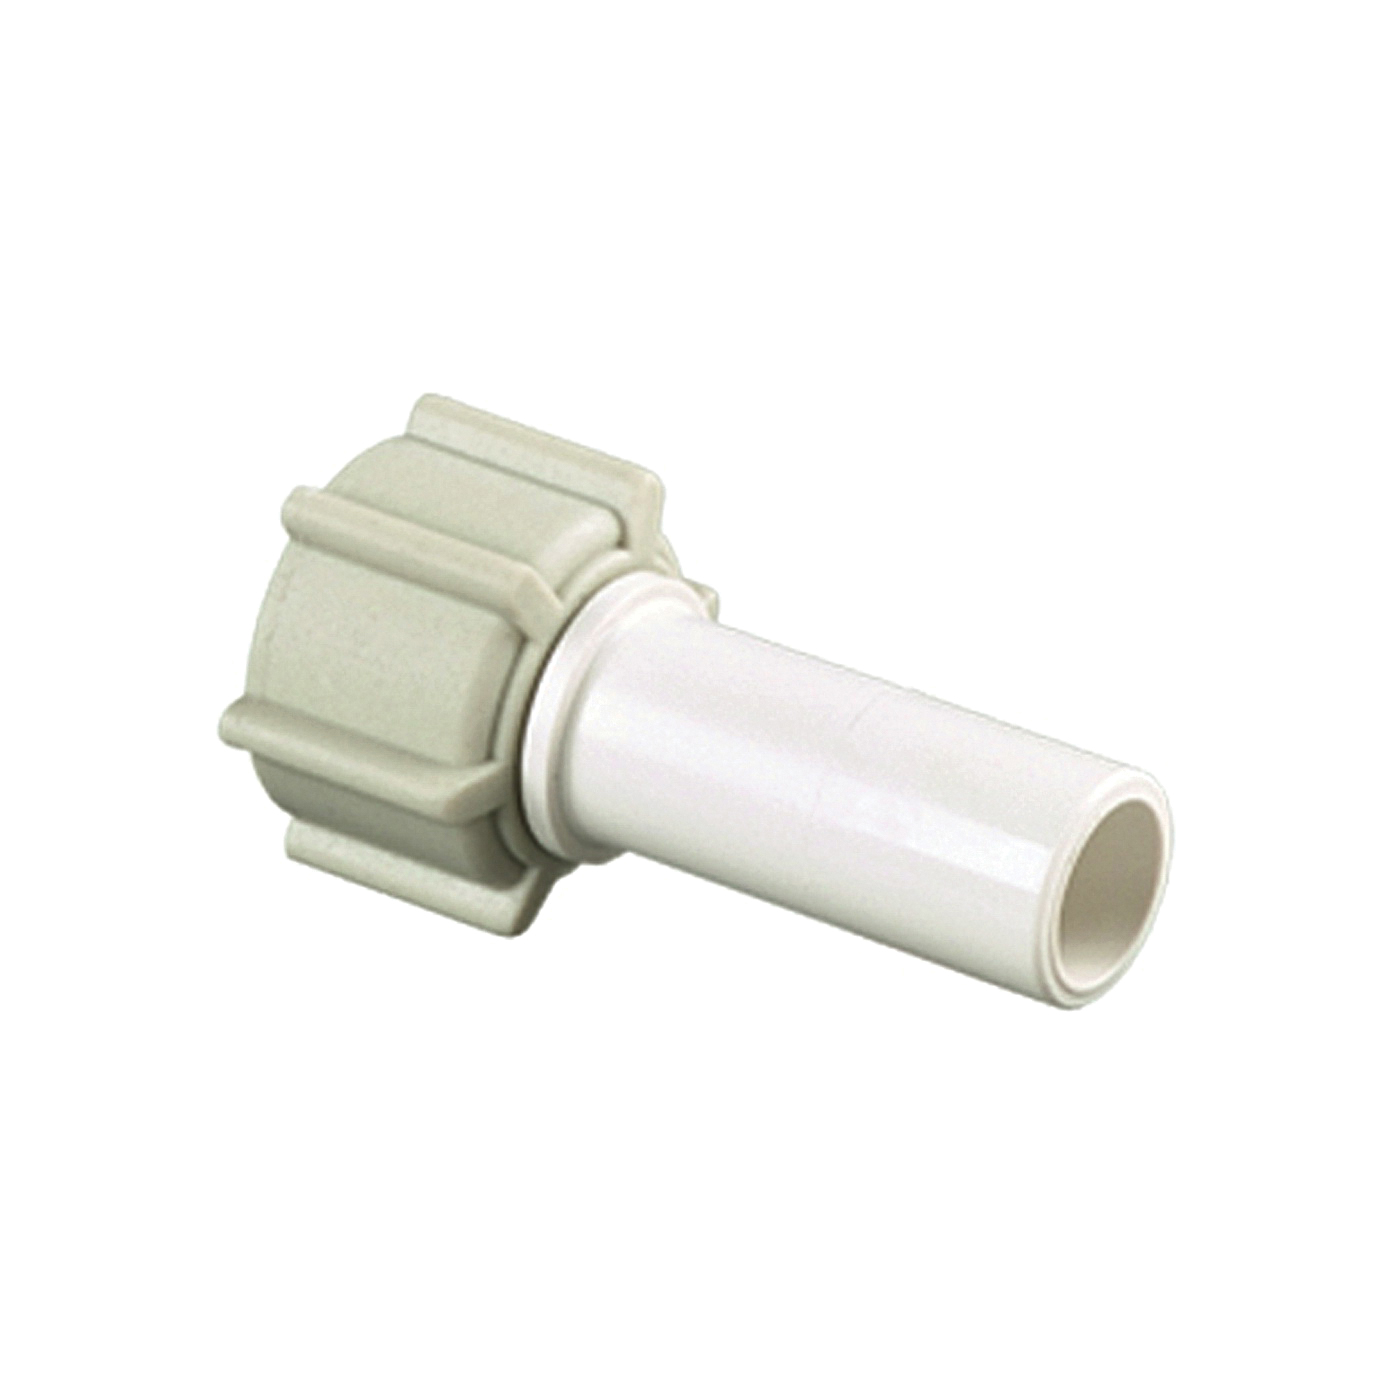 Watts 35 Series 3528-1008 Stem Connector, 1/2 in, CTS x FPT, Polysulfide, 250 psi Pressure, Off-White